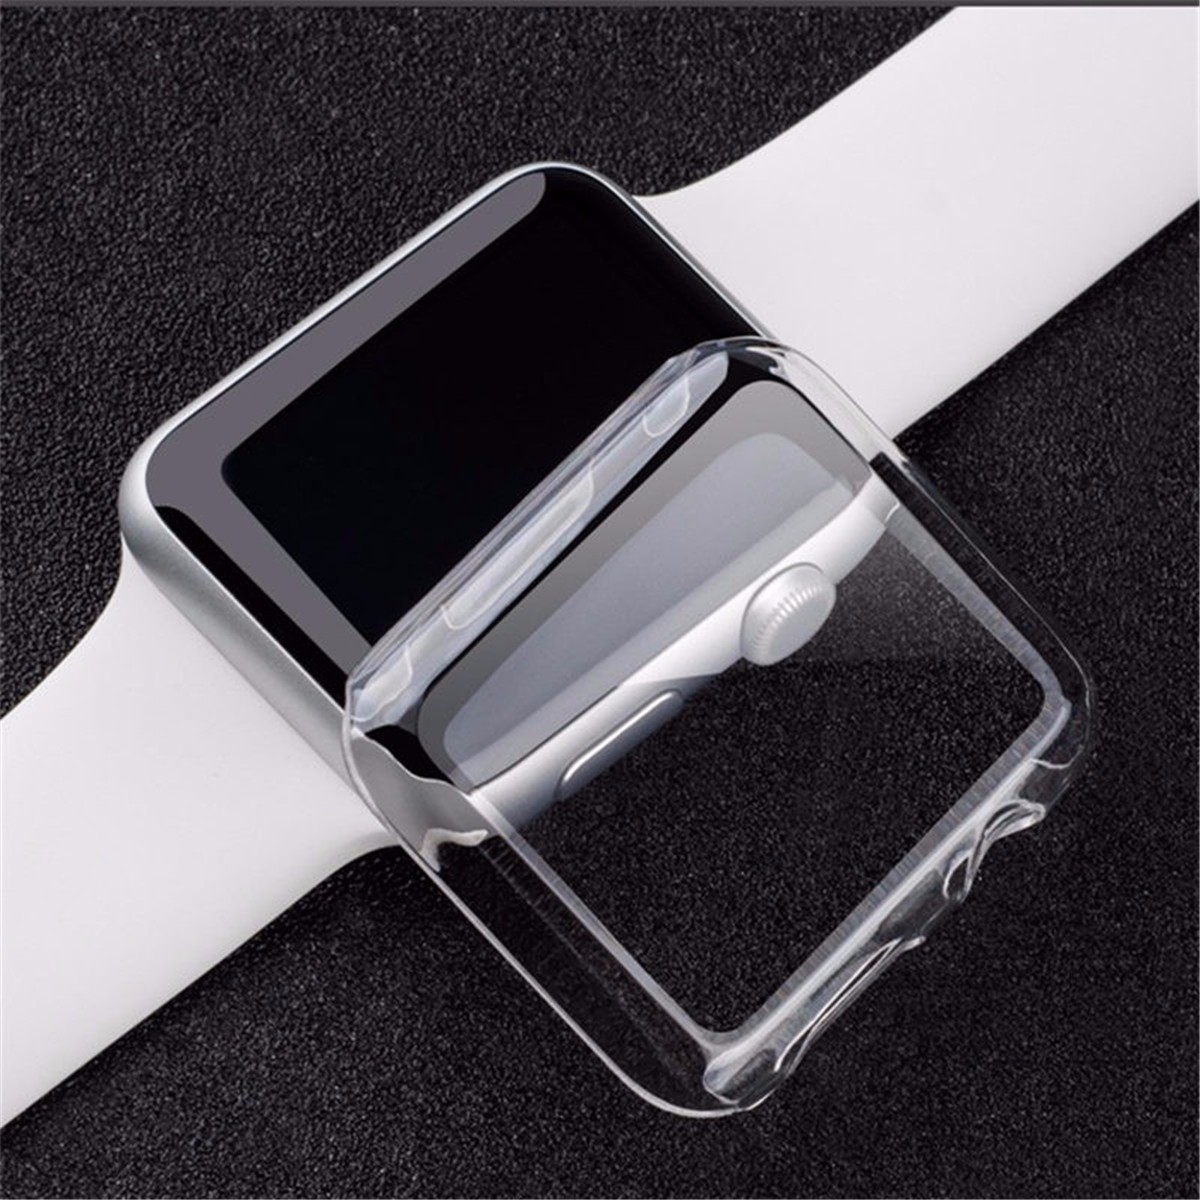 Transparent-Clear-Thin-Hard-Clip-On-Case-Cover-Screen-Protector-For-3842mm-Apple-Watch-1-1107650